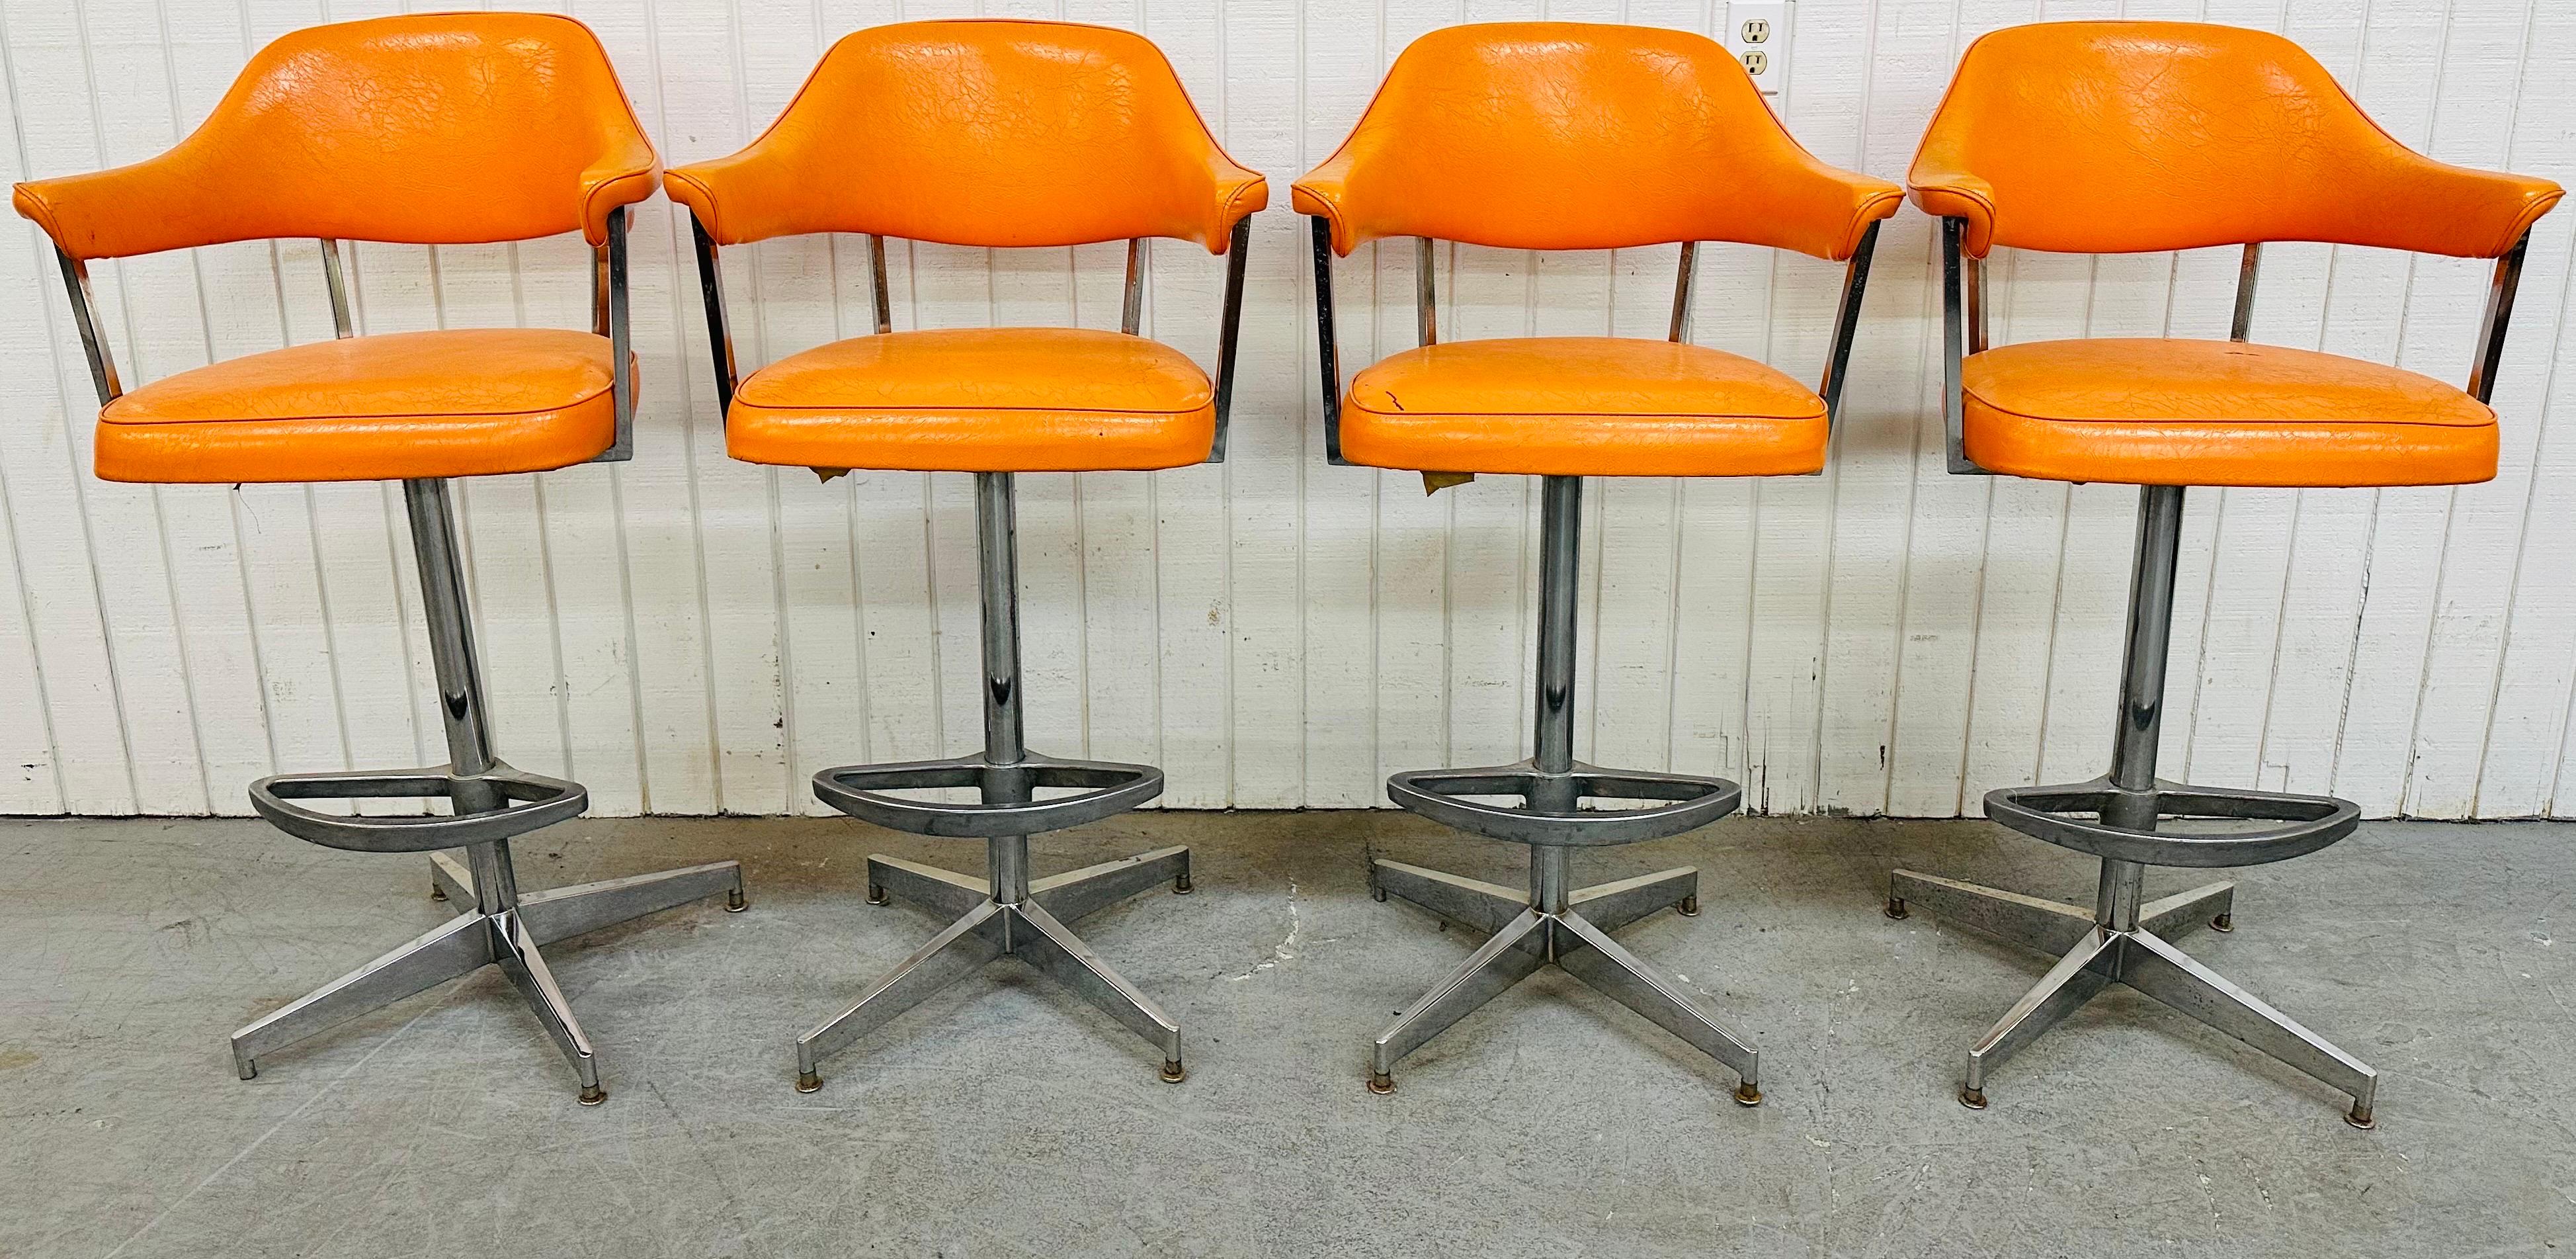 This listing is for a set of four Vintage Modern Chrome Swivel Bar Stools. Featuring an original tangerine leather upholstered back rest and seat, a heavy chrome base with foot rest, and the ability to swivel left or right. This is an exceptional